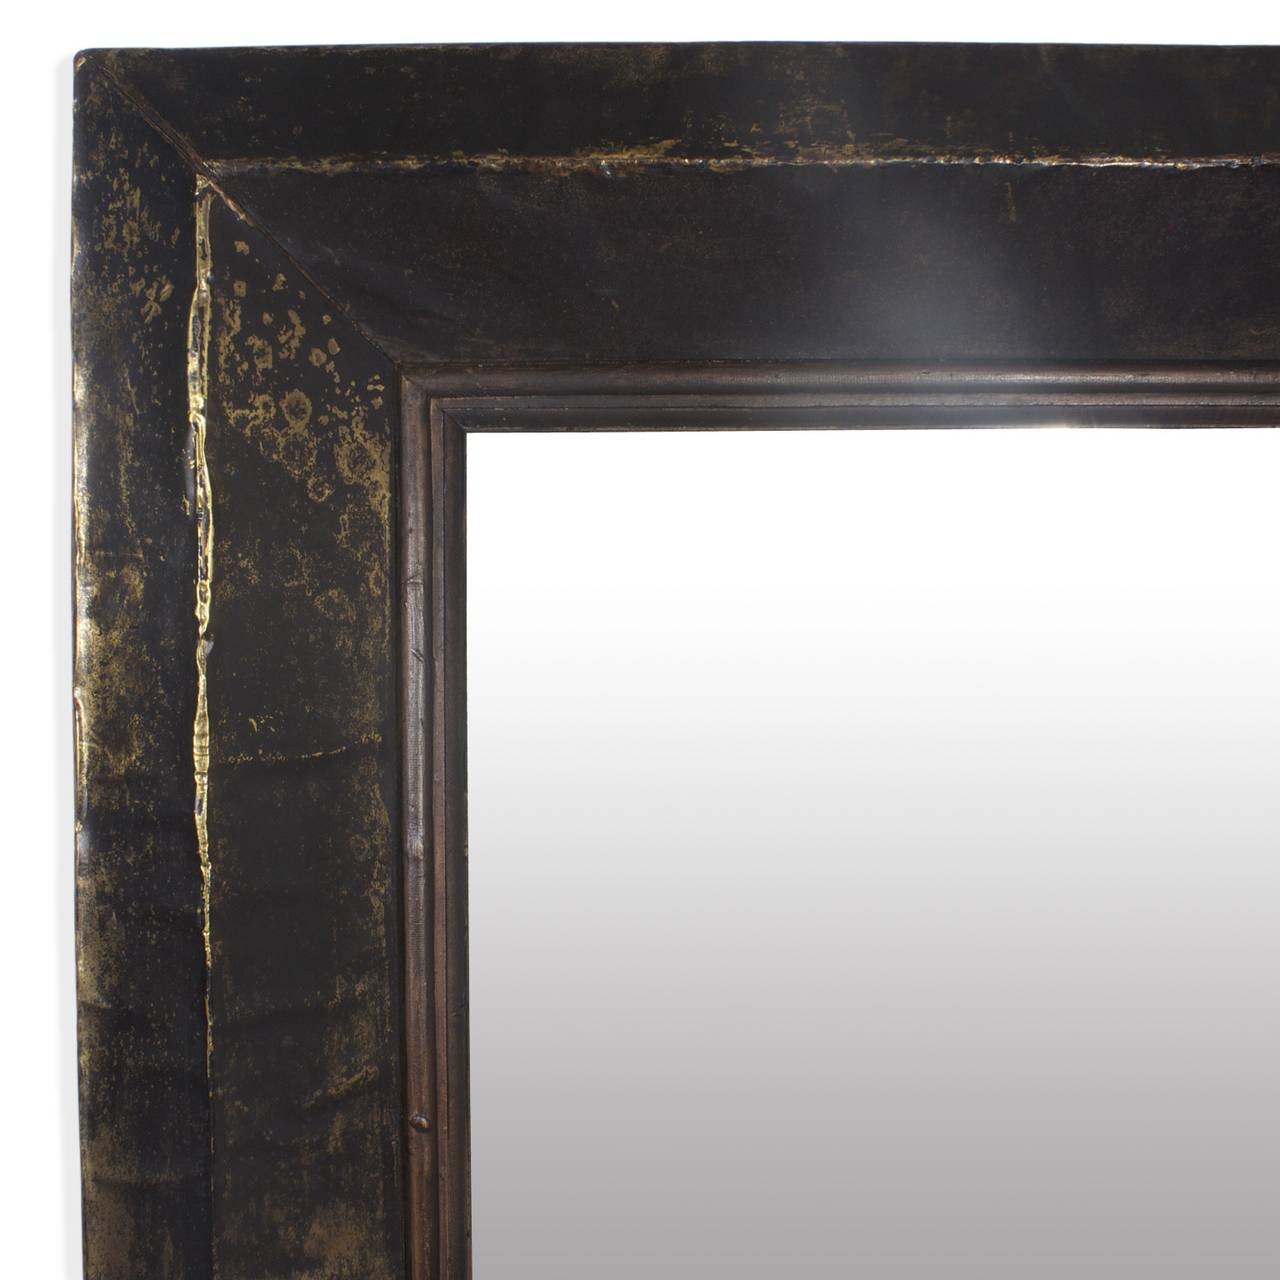 An usual rectangular mirror set in a rustic brass wrapped frame which has achieved a warm, rich patina that looks like distressed leather. Original beveled glass with acquired charm. Includes strong architectural lines and can be hung horizontally